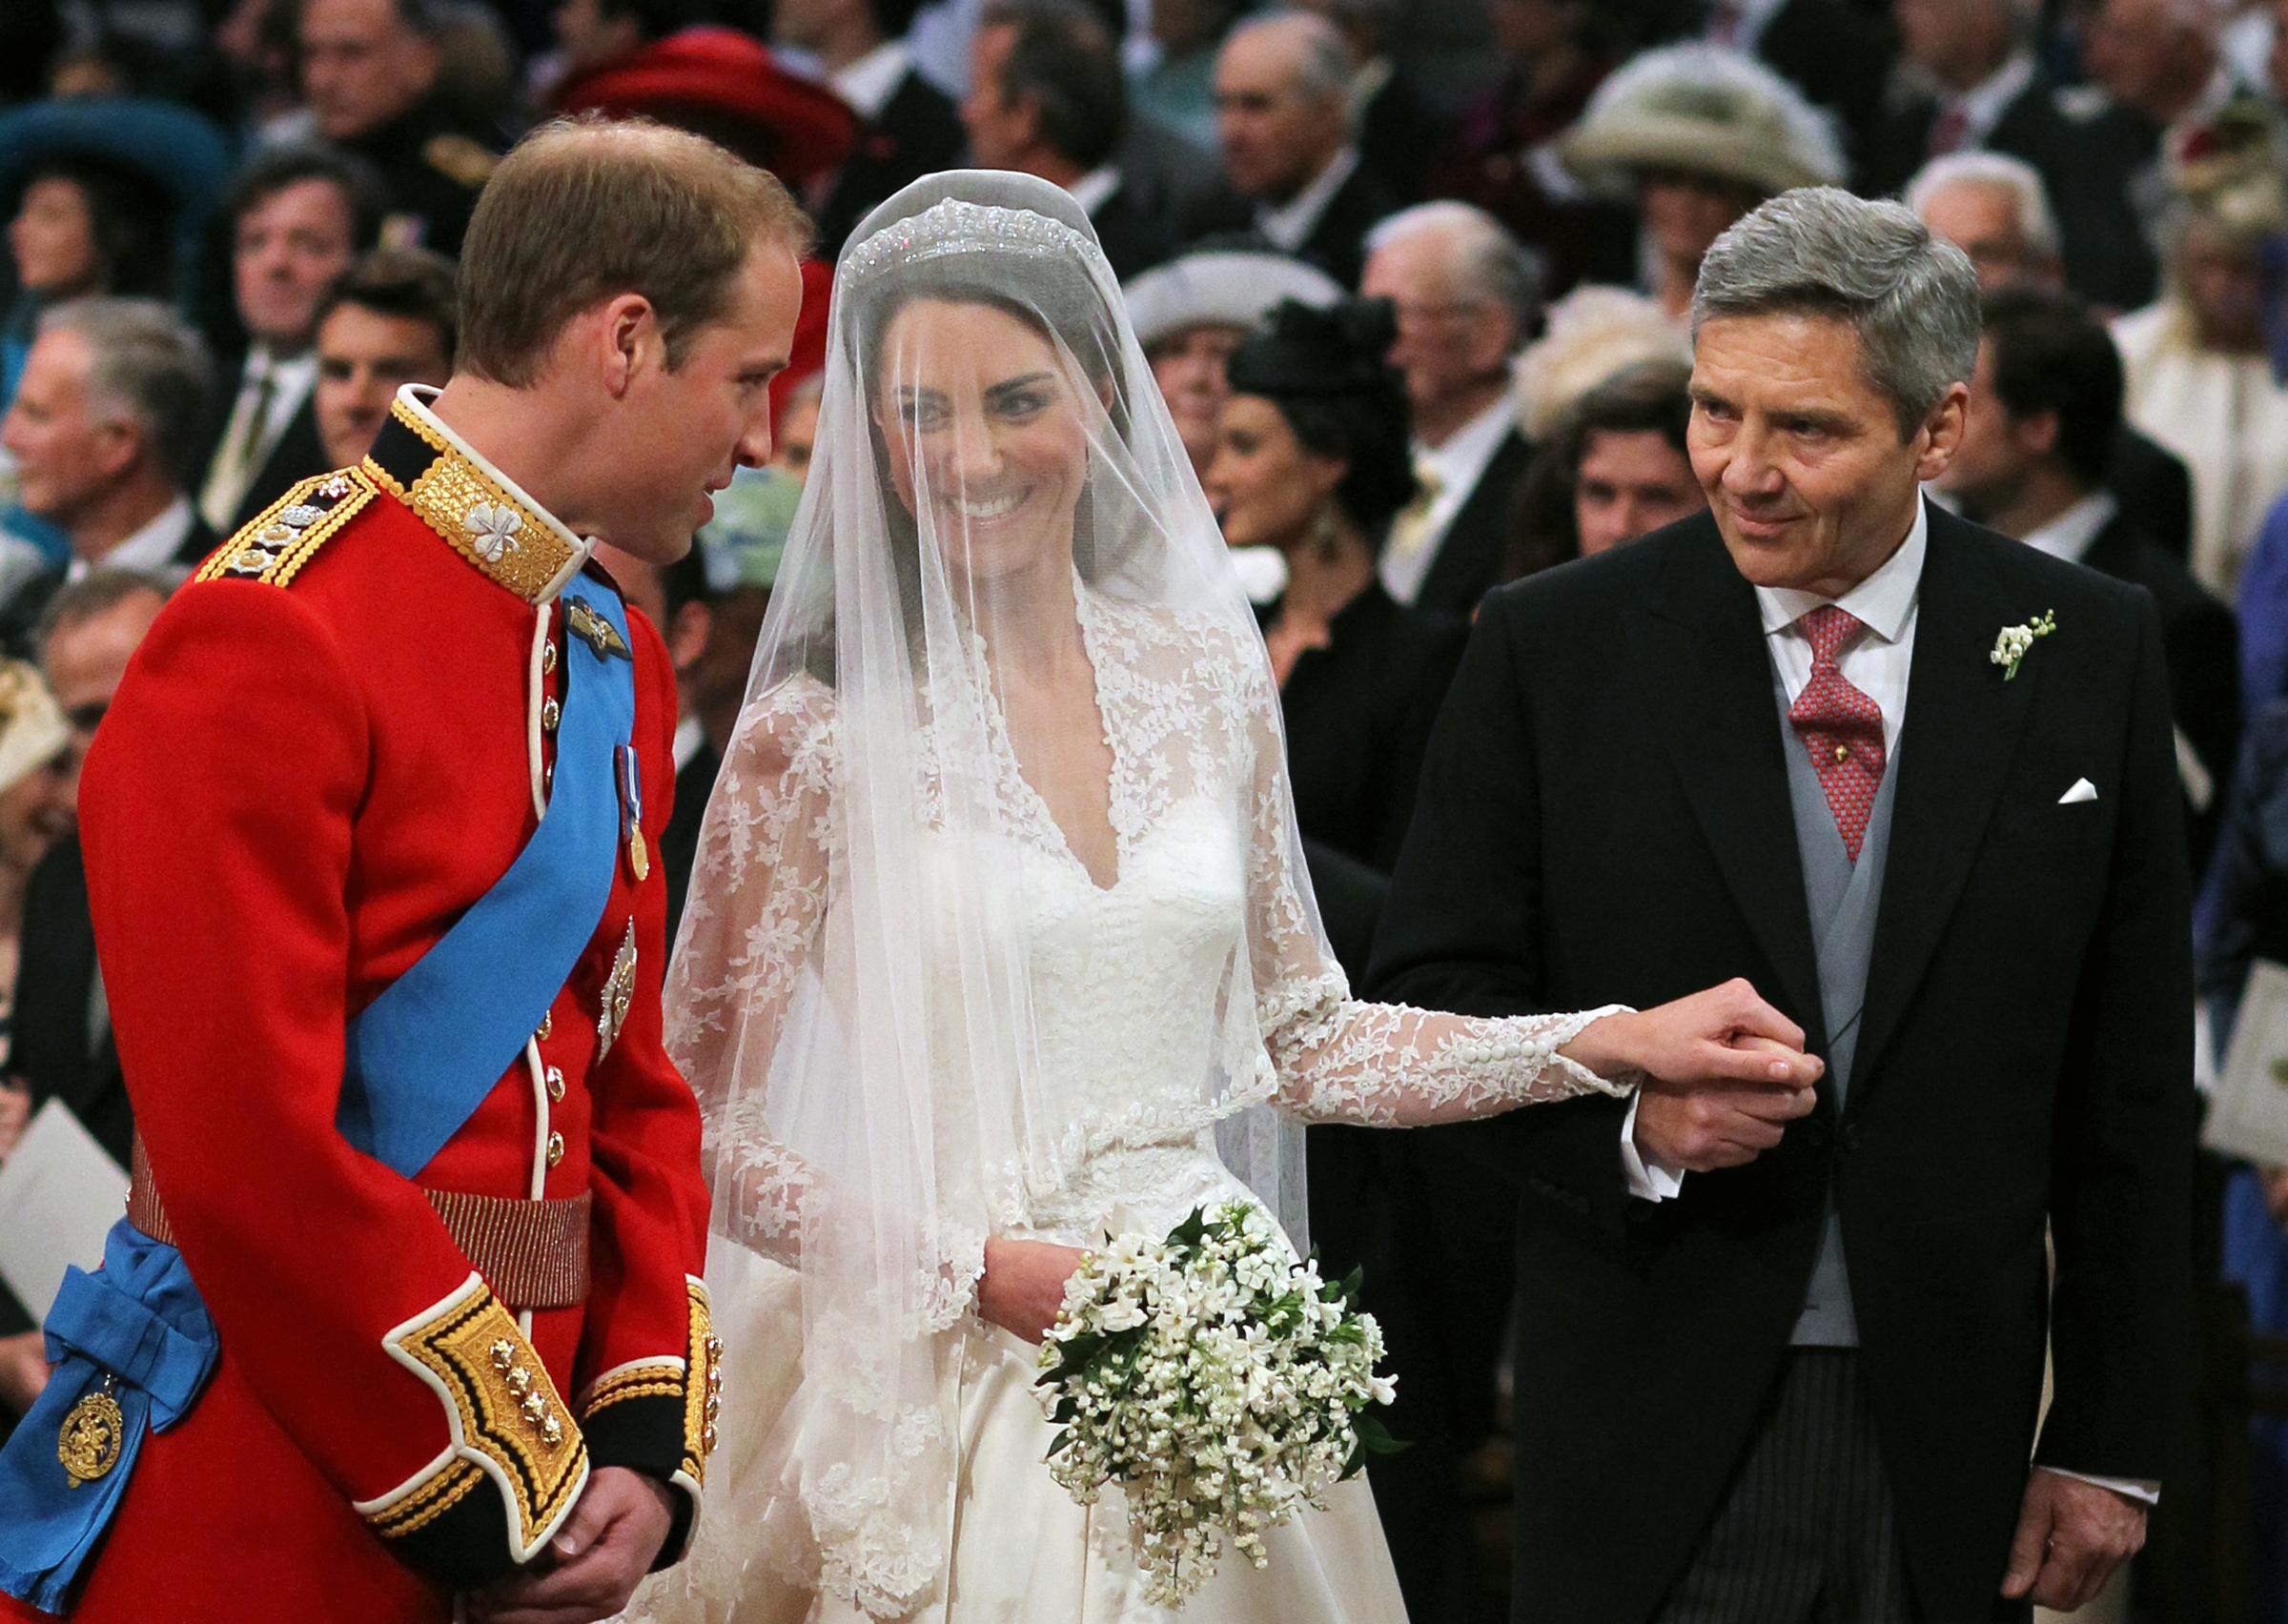 The big day - Prince William and Kate Middleton with her father Michael Middleton at Westminster Abbey